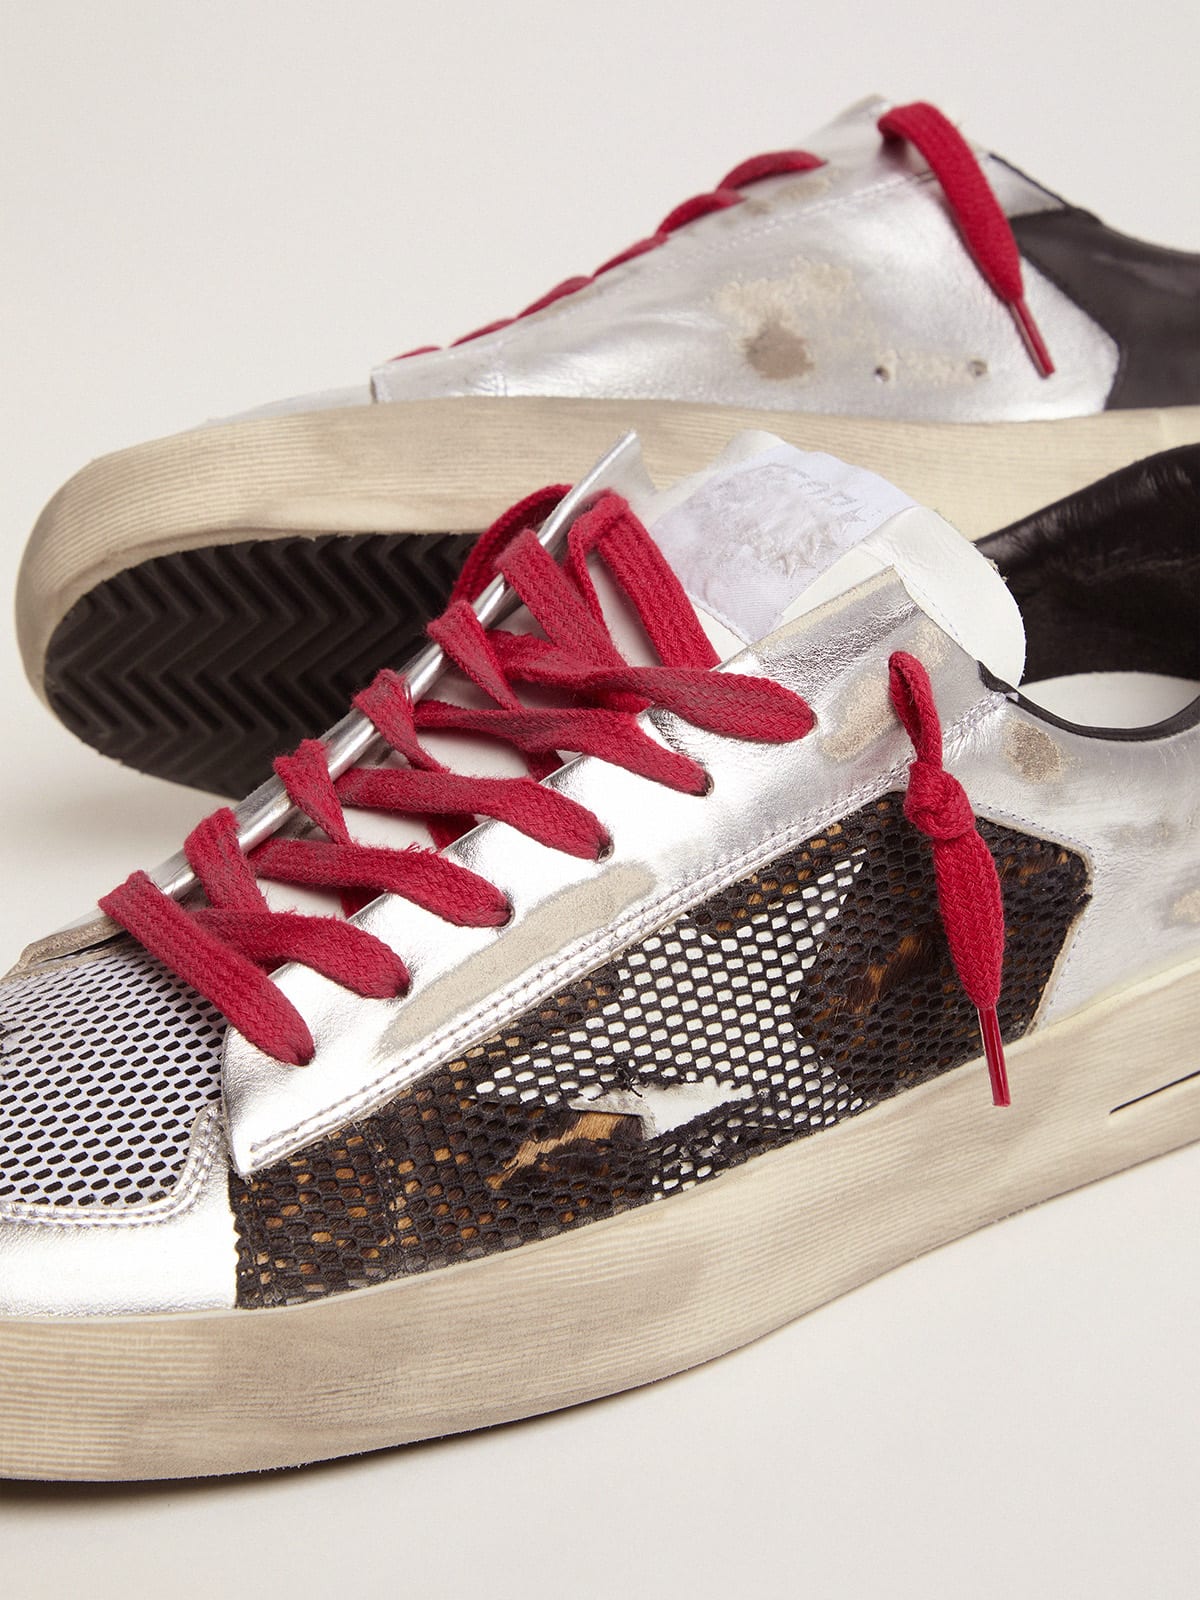 Golden Goose - Men's Limited Edition LAB silver and animal-print Stardan sneakers in 